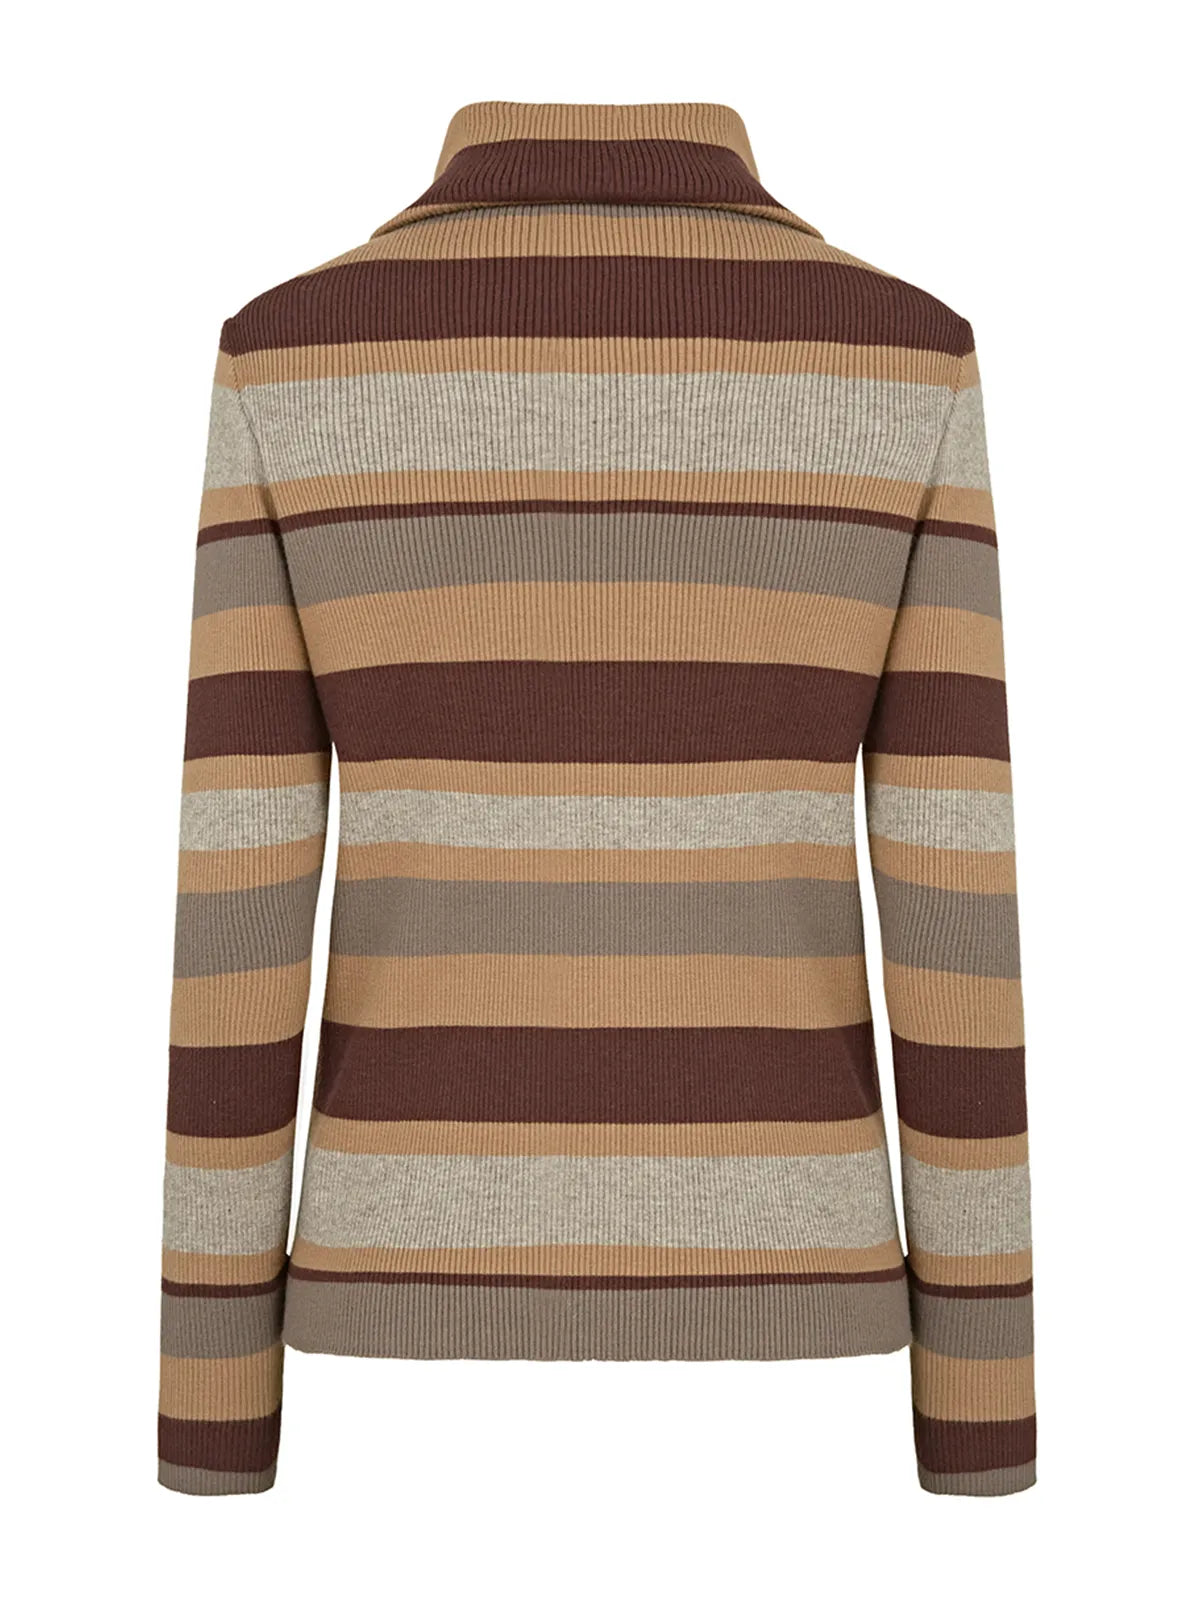 Stay on-trend and comfortable with this contemporary knit sweater, showcasing eye-catching color contrasts and a tailored fit for a perfect balance of style and comfort.